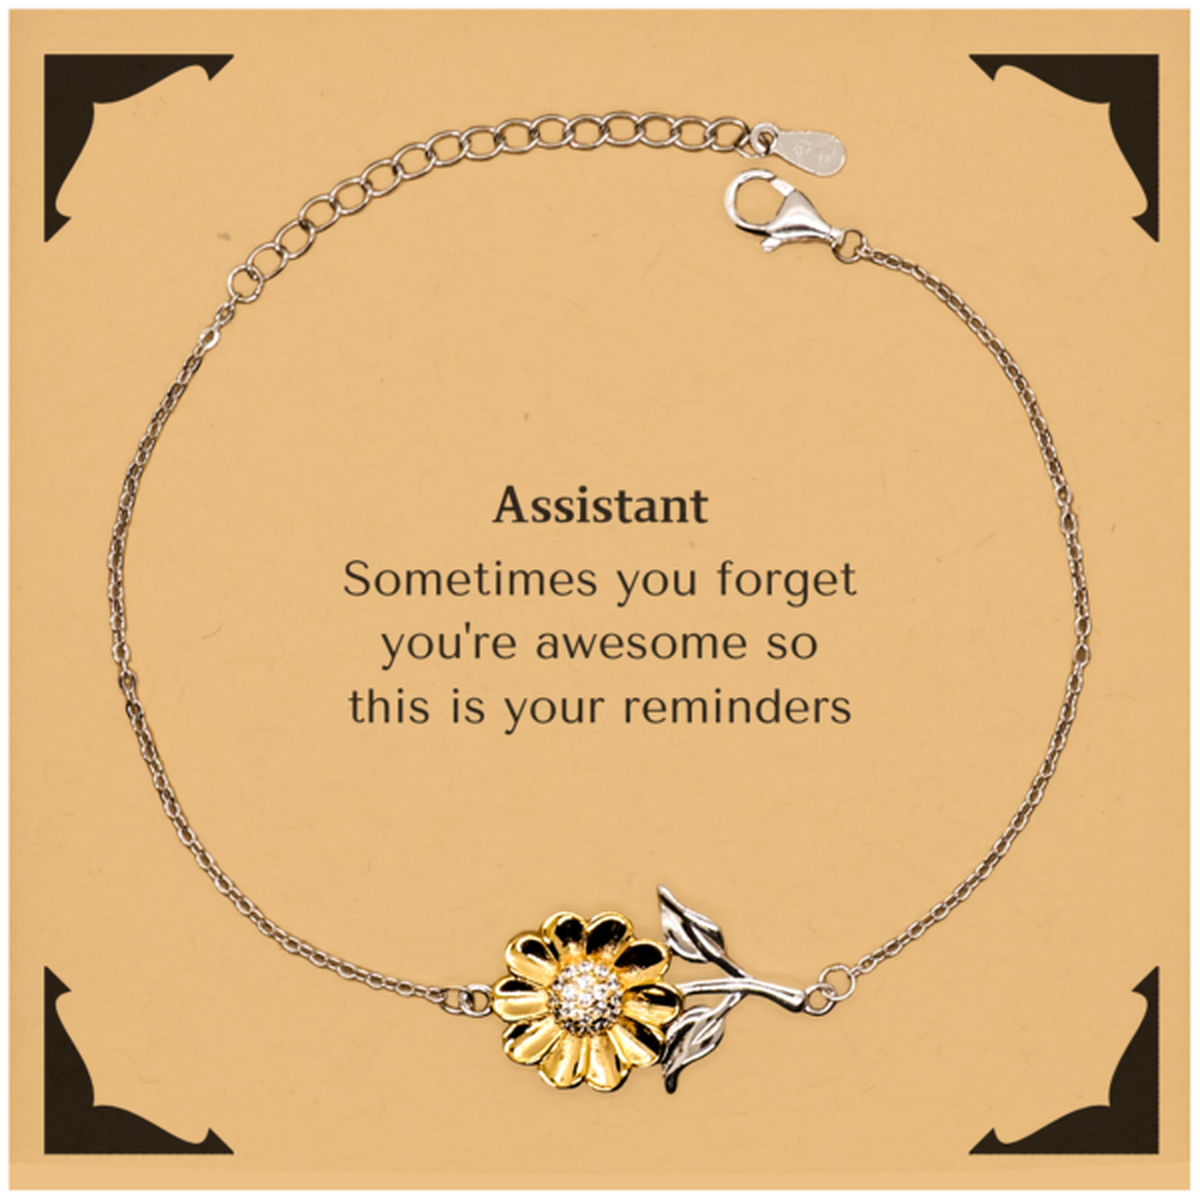 Sentimental Assistant Sunflower Bracelet, Assistant Sometimes you forget you're awesome so this is your reminders, Graduation Christmas Birthday Gifts for Assistant, Men, Women, Coworkers